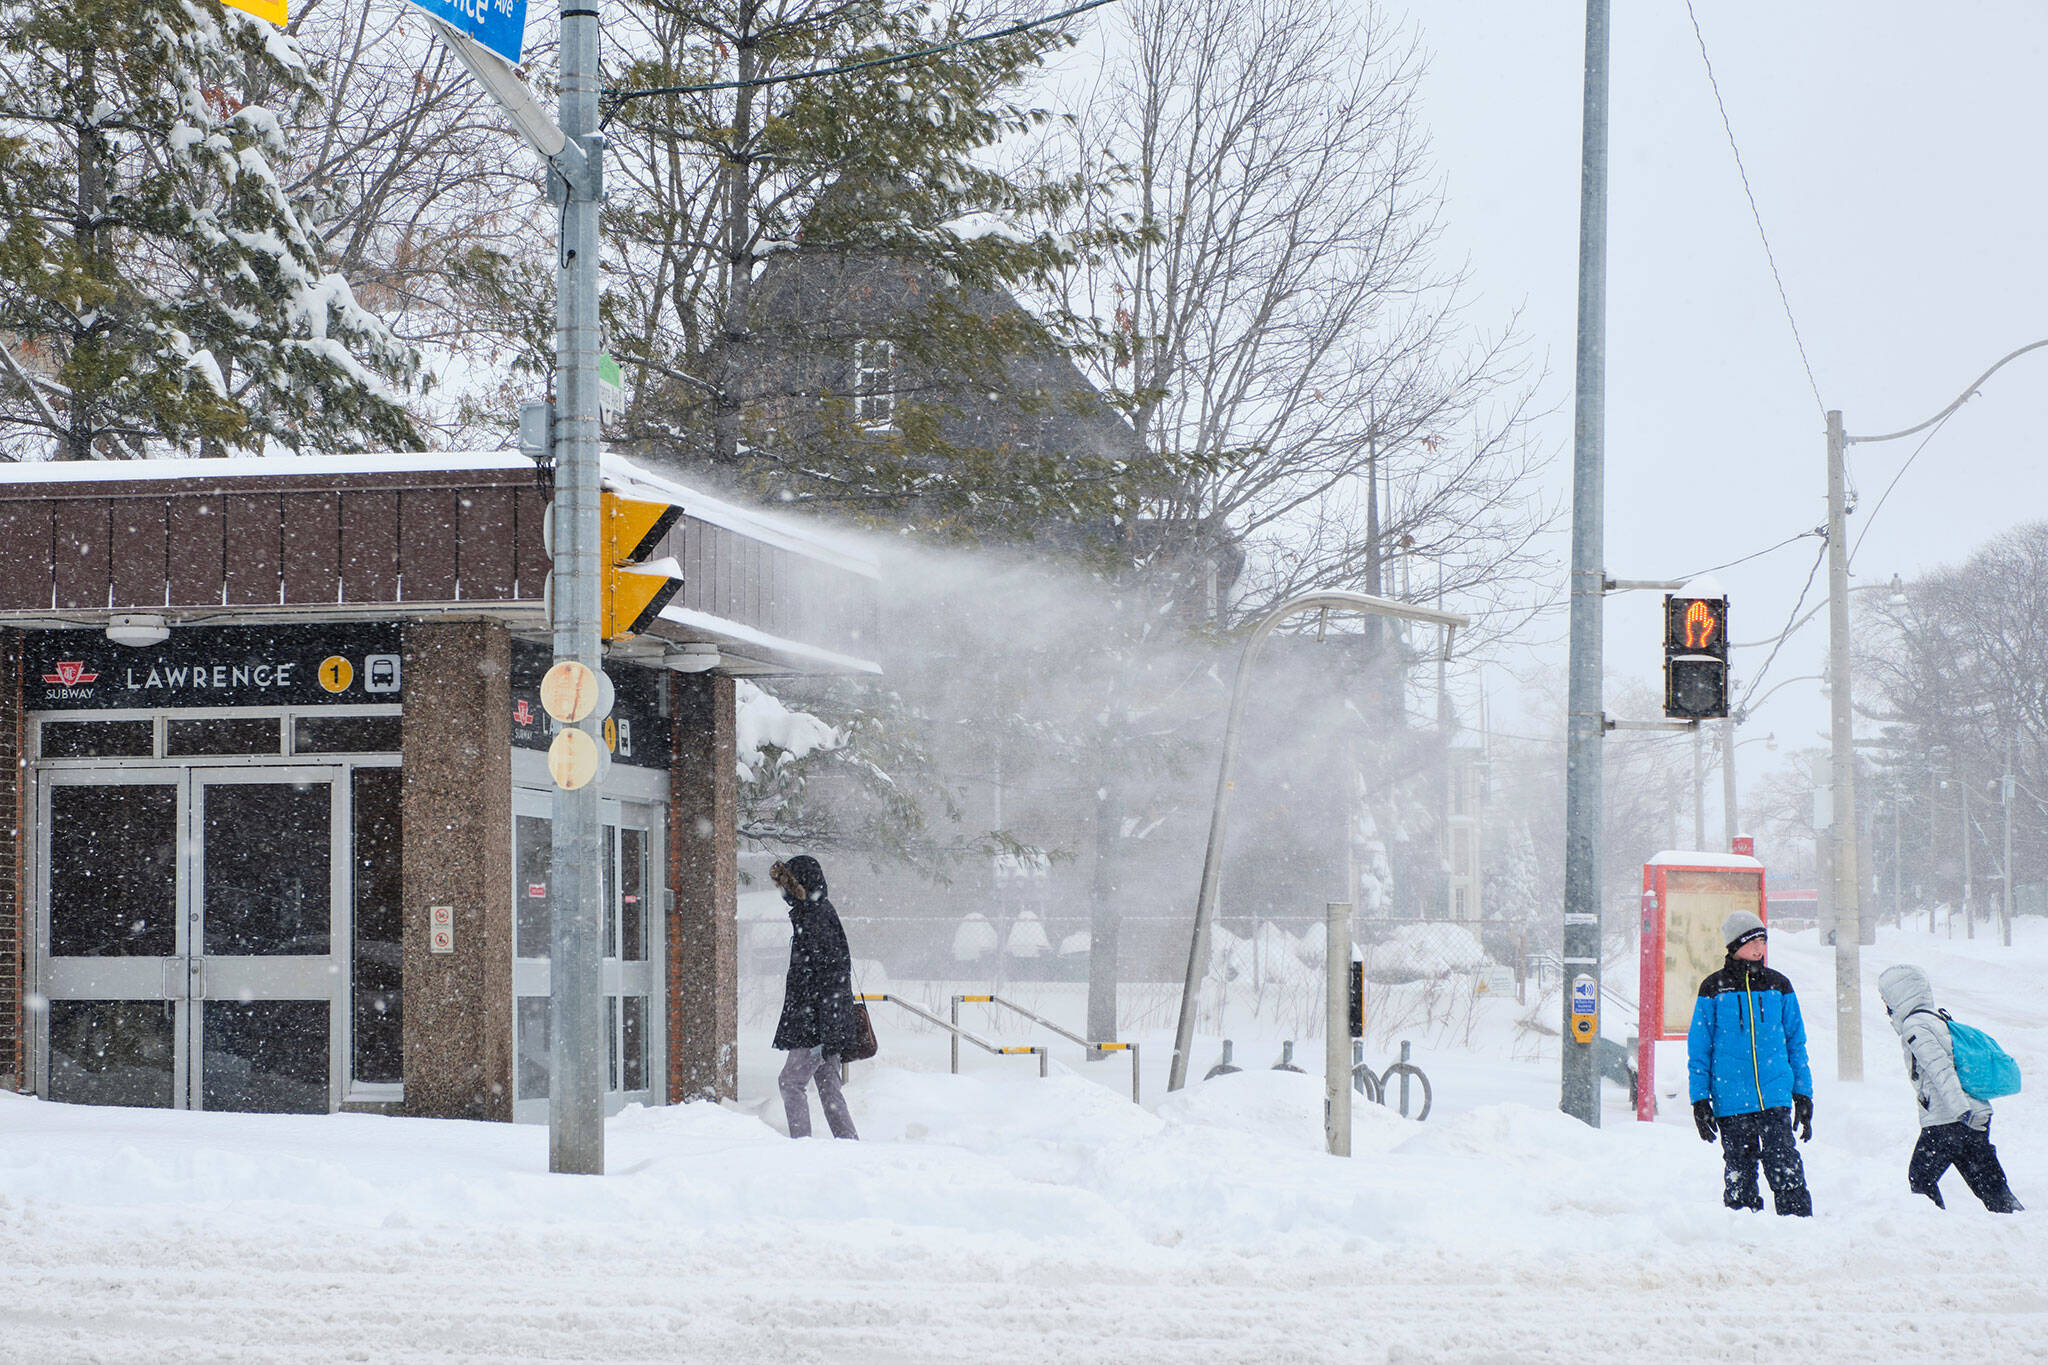 A 'winter whiteout' is headed Canada's way according to weather forecast